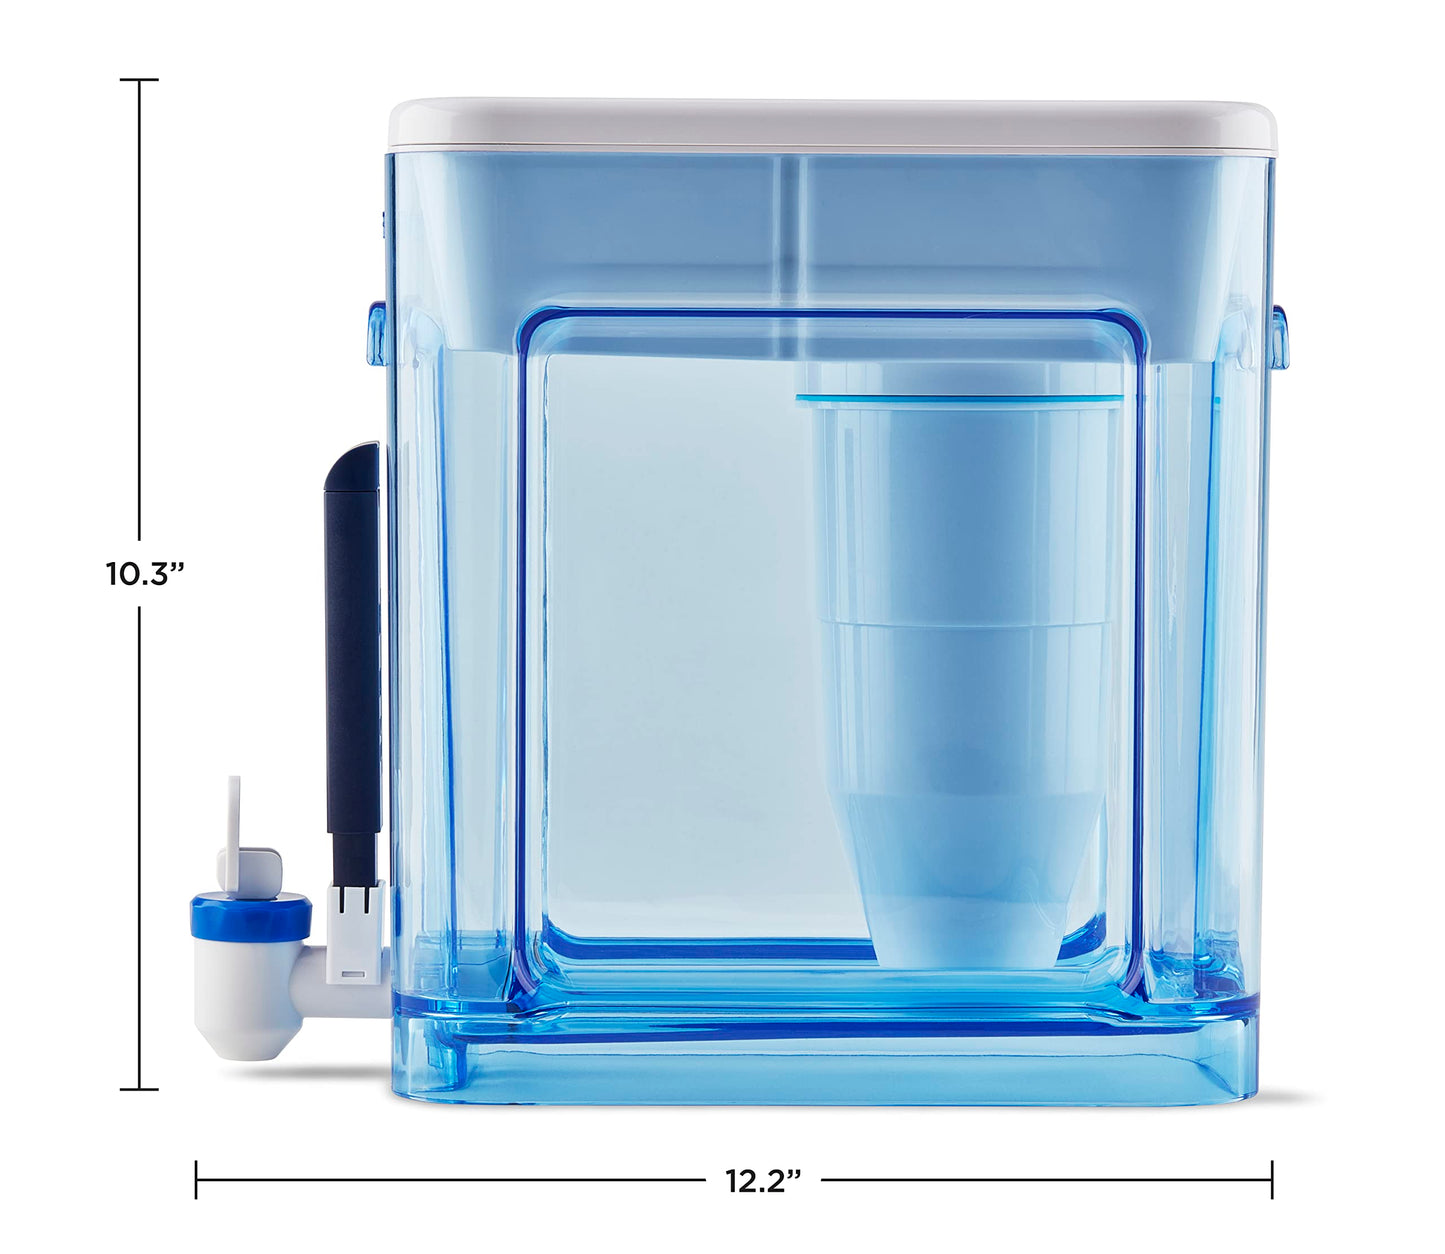 ZeroWater 22-Cup Ready-Read 5-Stage Water Filter Dispenser with Instant Read Out - 0 TDS IAPMO Certified to Reduce Lead, Chromium, and PFOA/PFOS